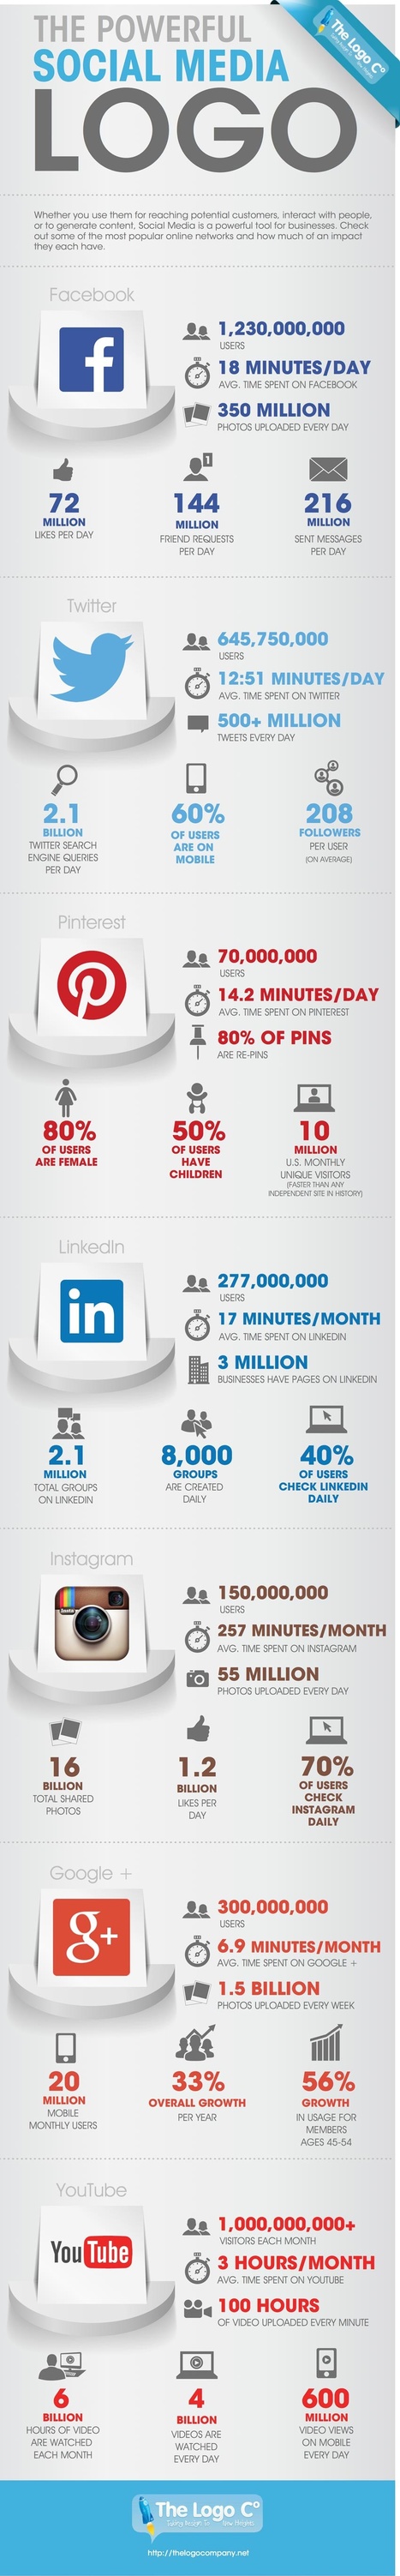 The Power Of Social Media #INFOGRAPHIC | Hamptons Real Estate | Scoop.it